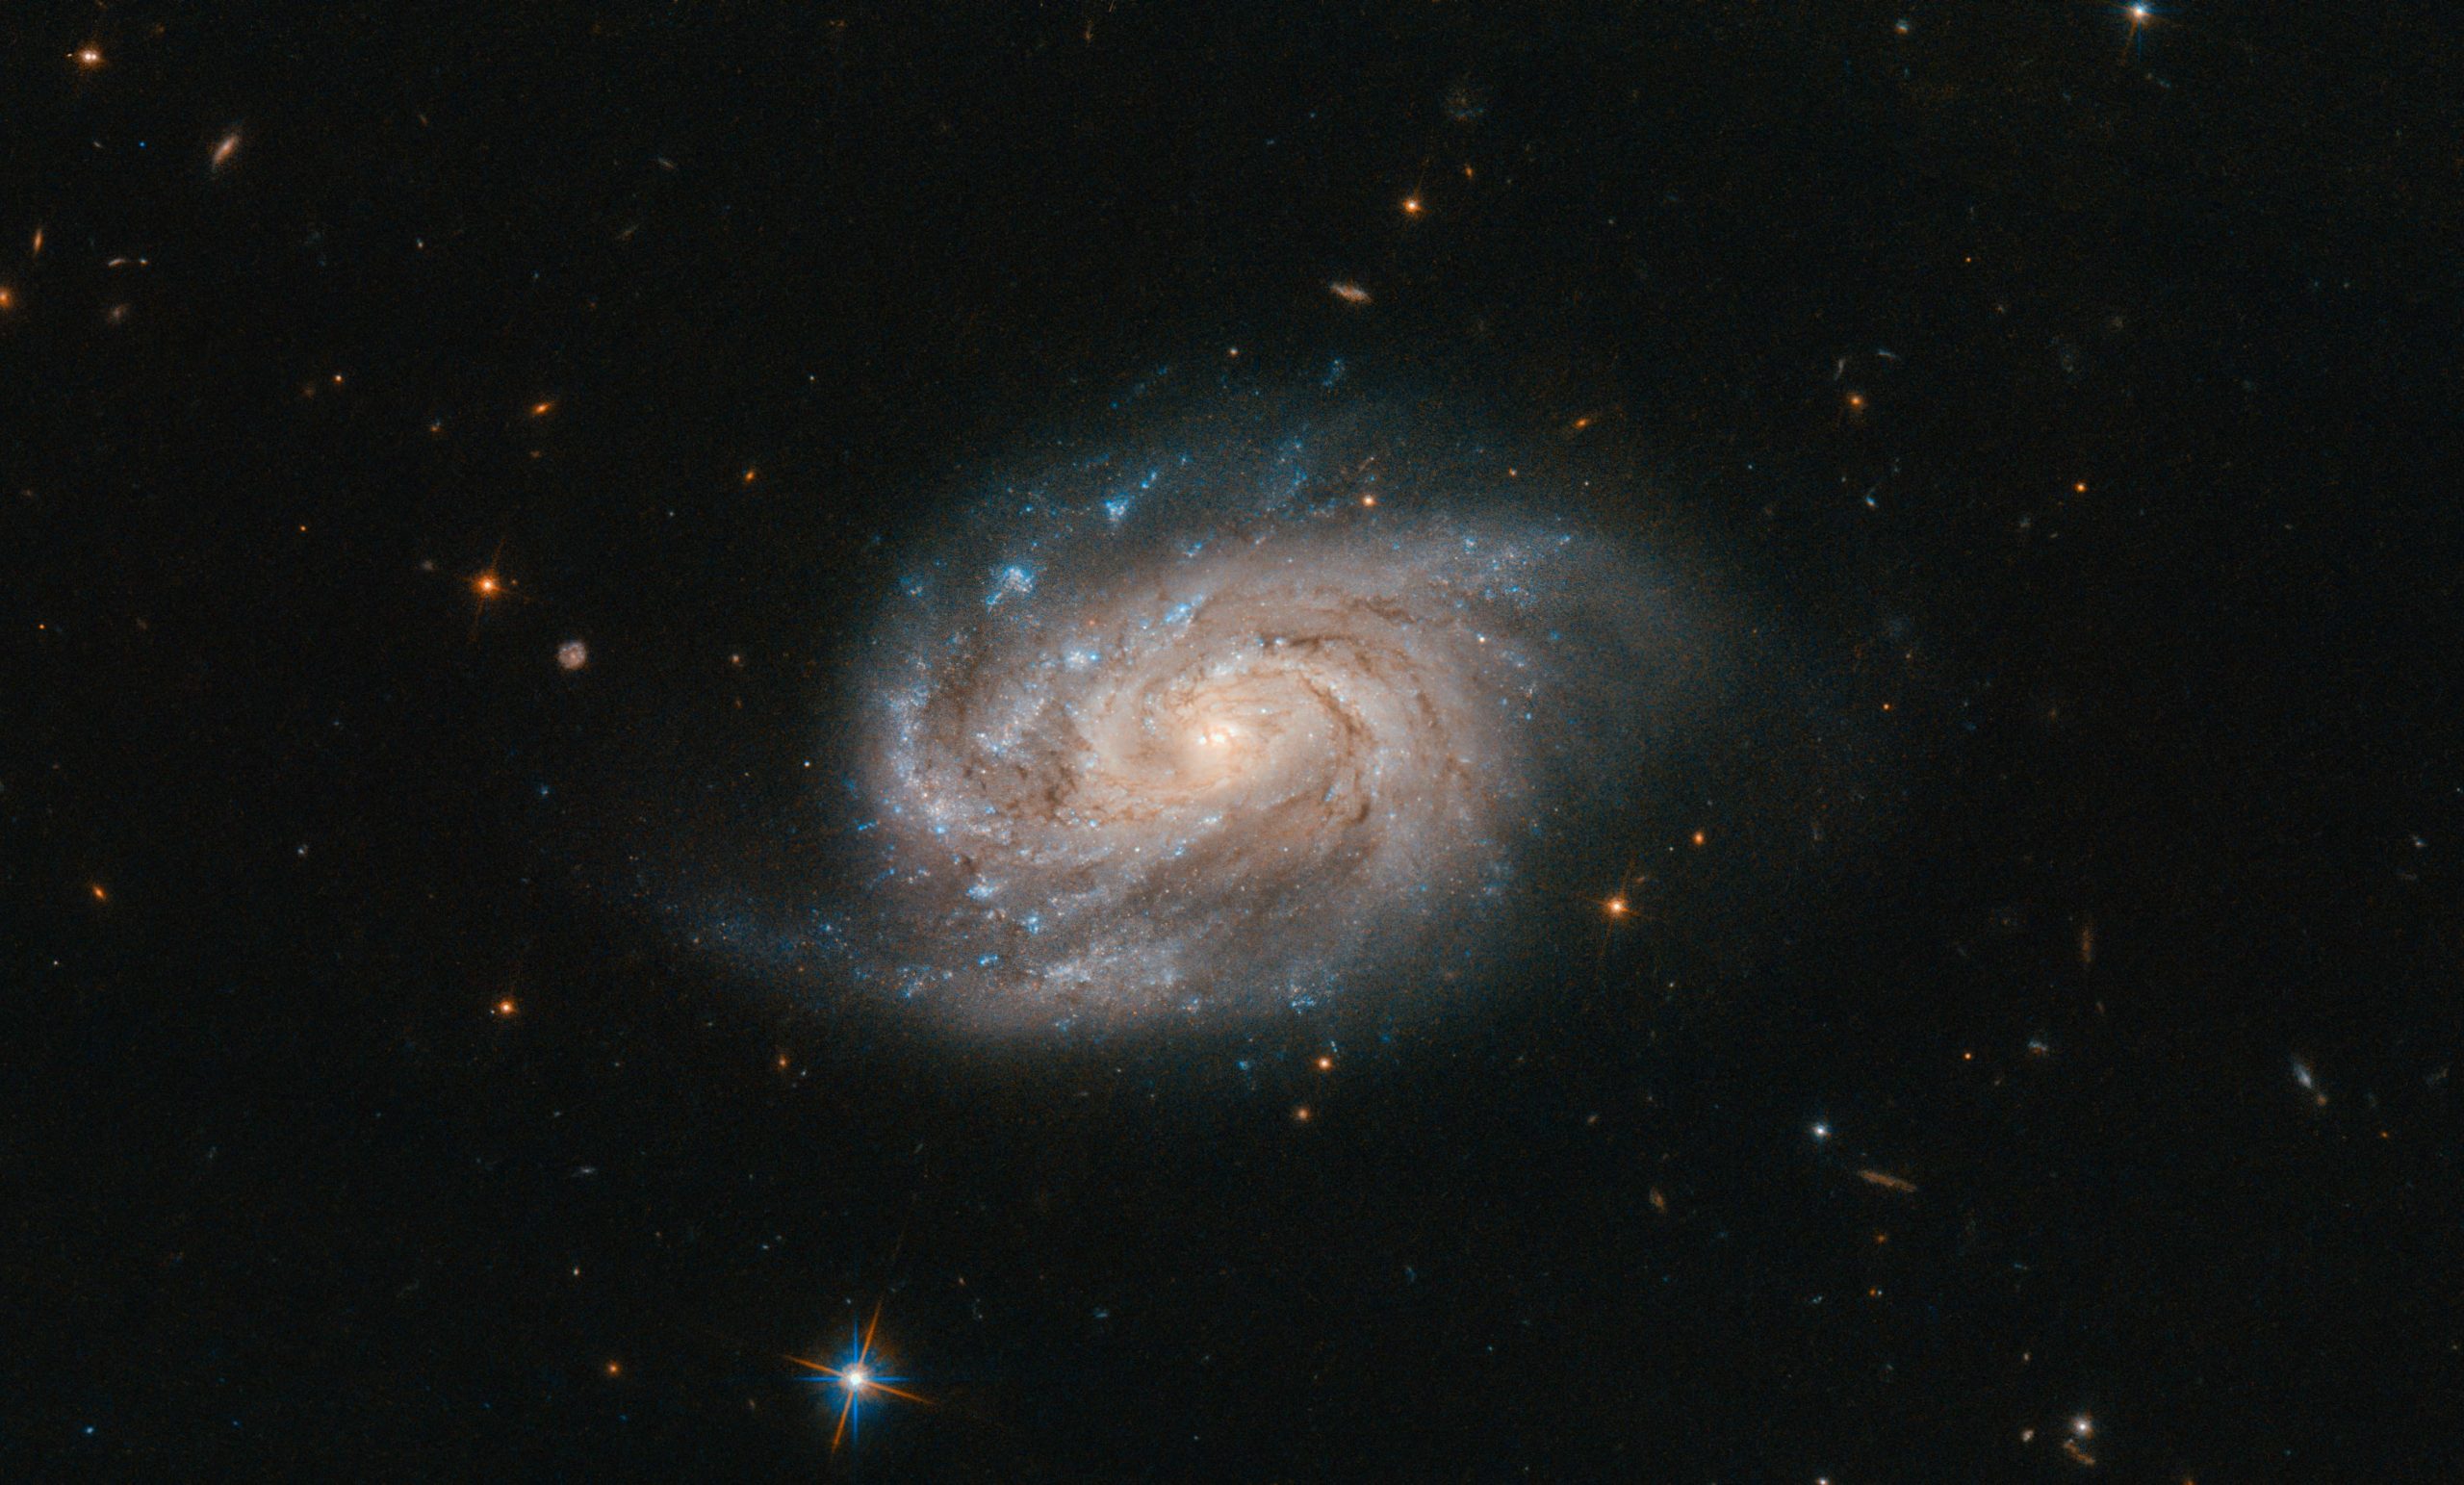 Hubble Space Telescope Spies NGC 1803 in the Painter's Easel